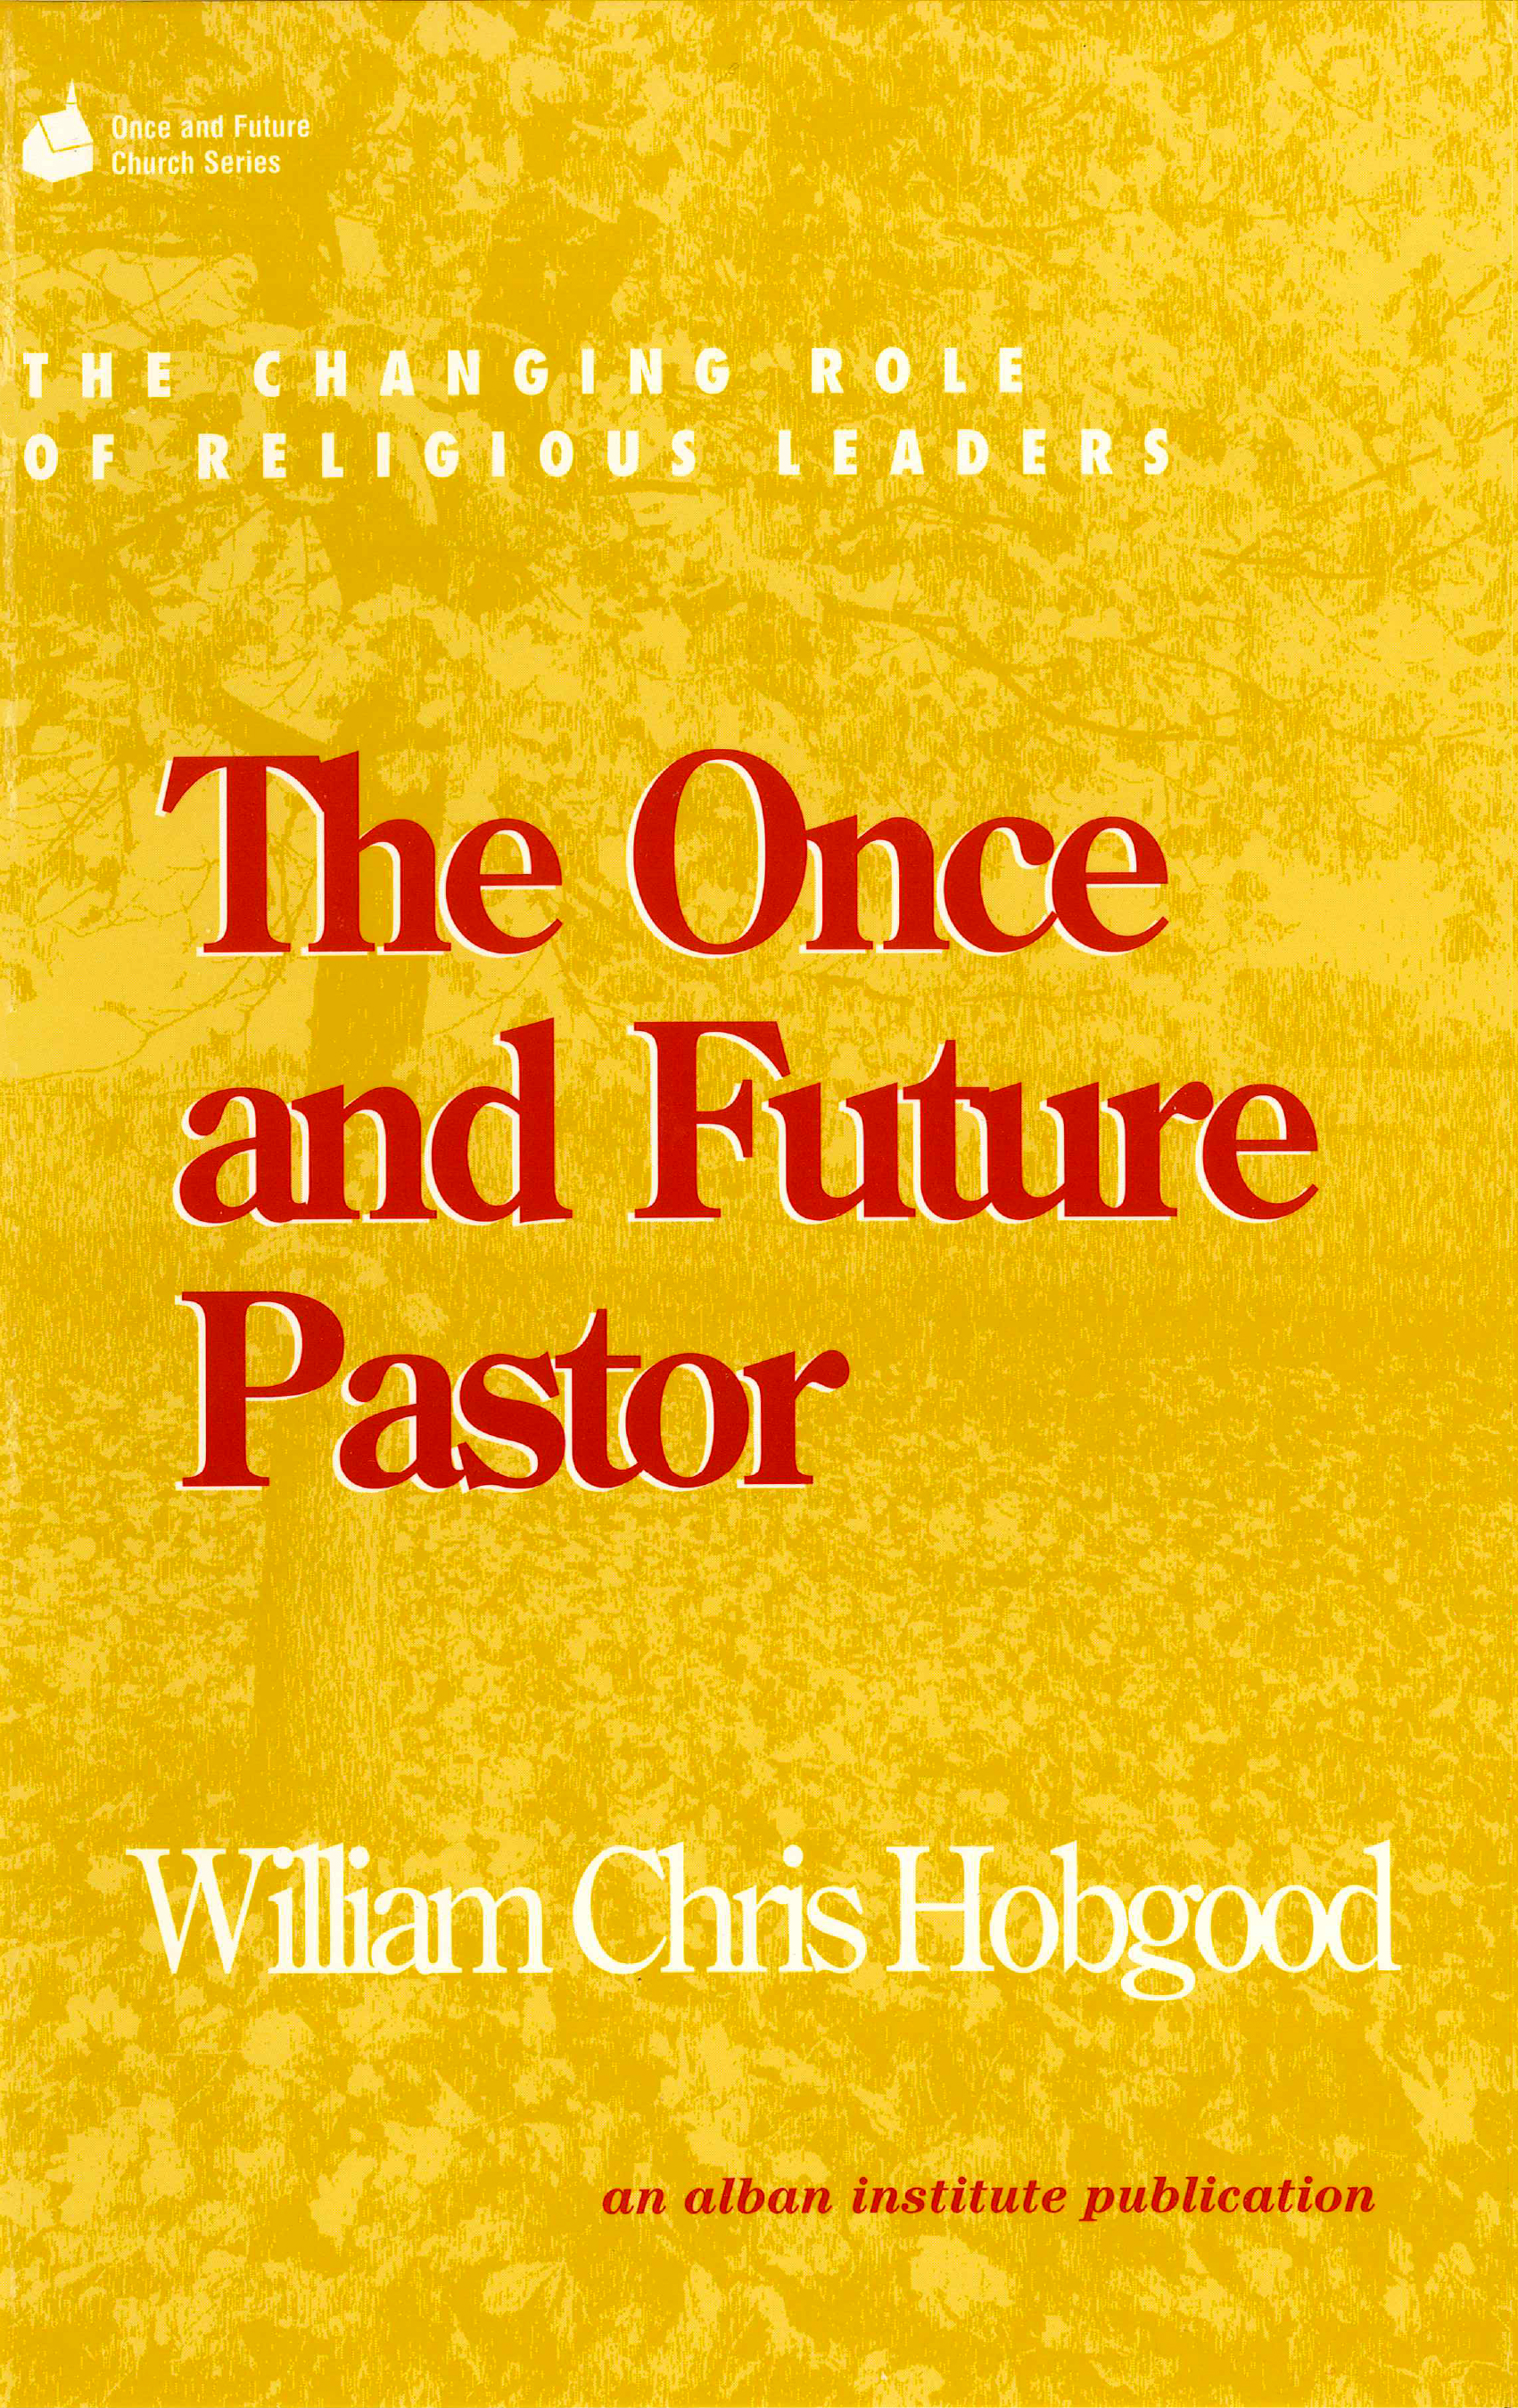 The Once and Future Pastor: The Changing Role of Religious Leaders